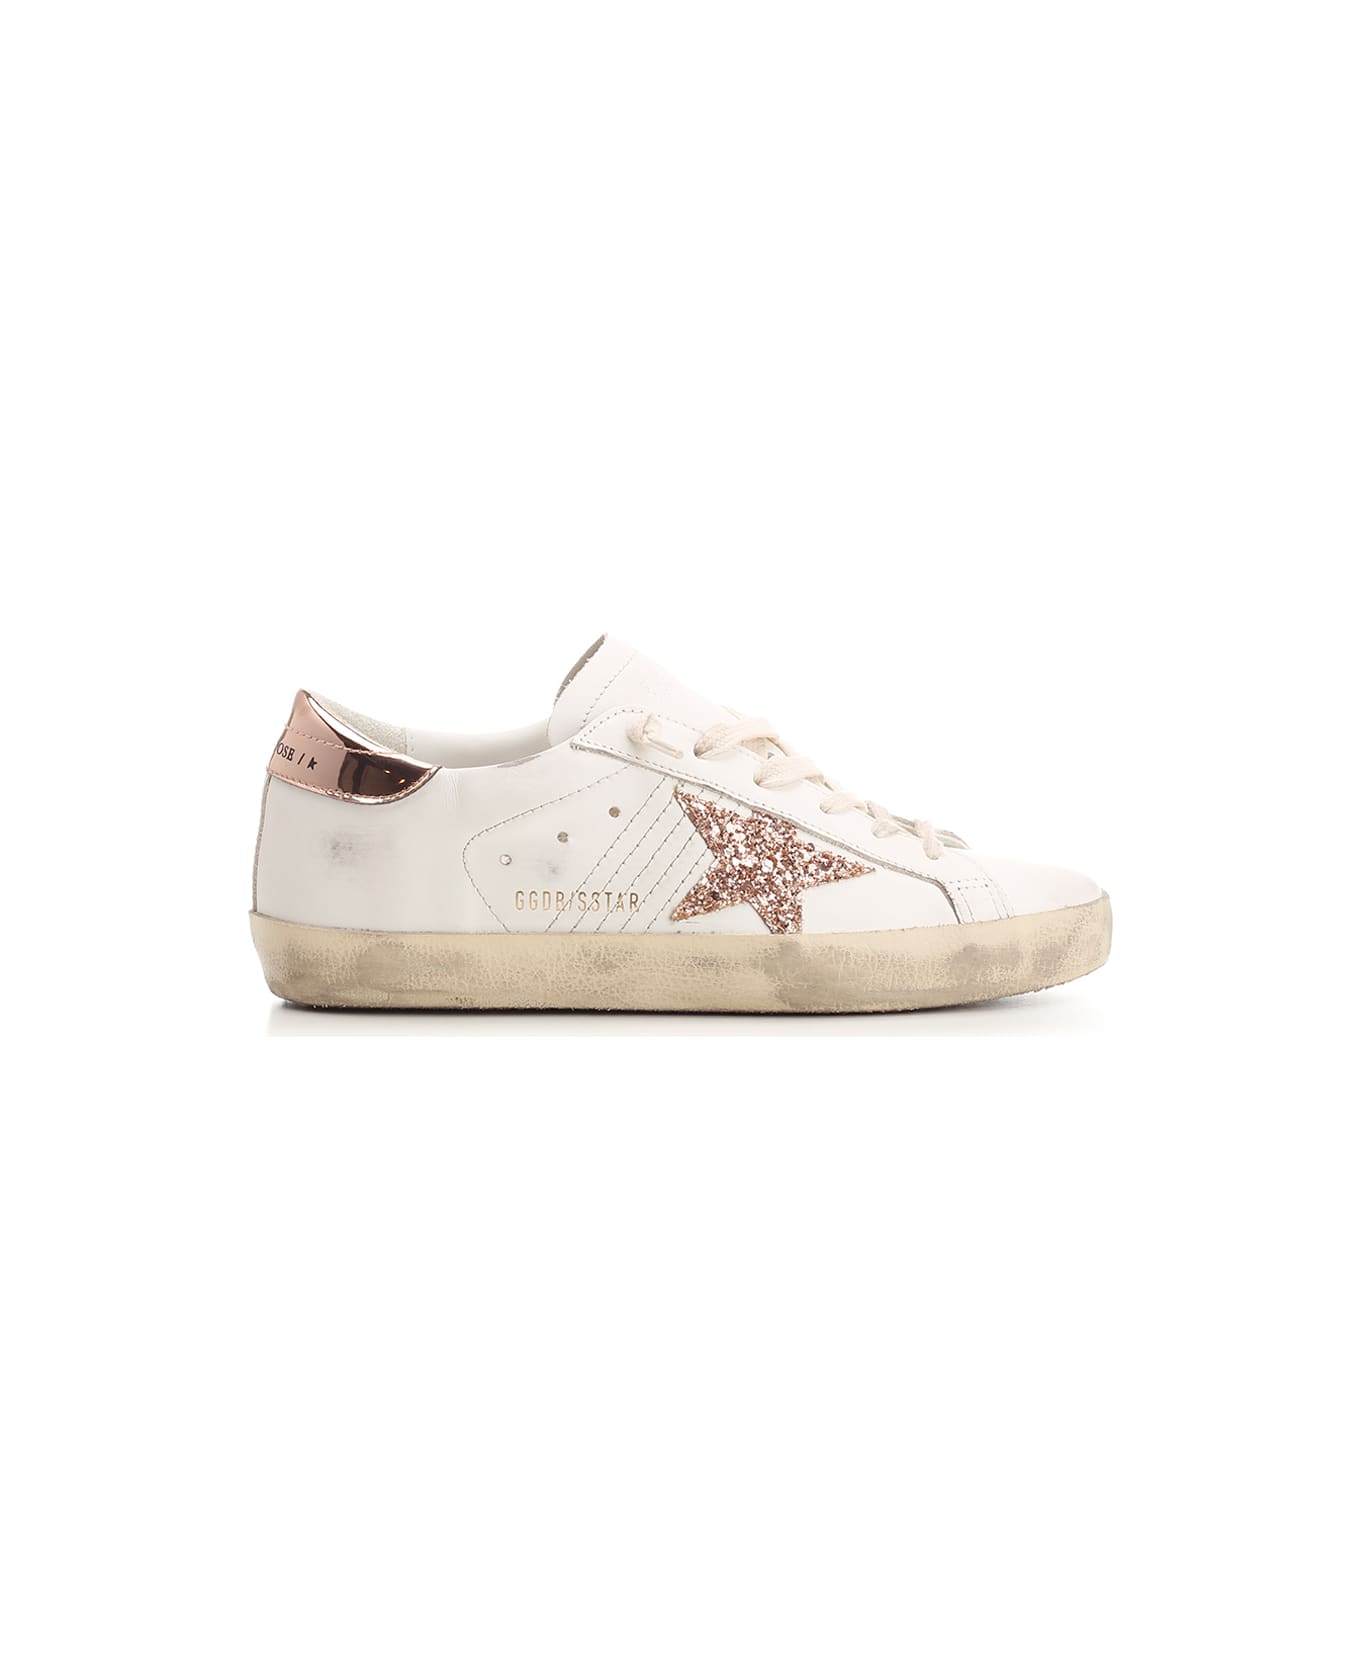 Golden Goose Superstar Classic Sneakers - simone rocha embellished leather sandals